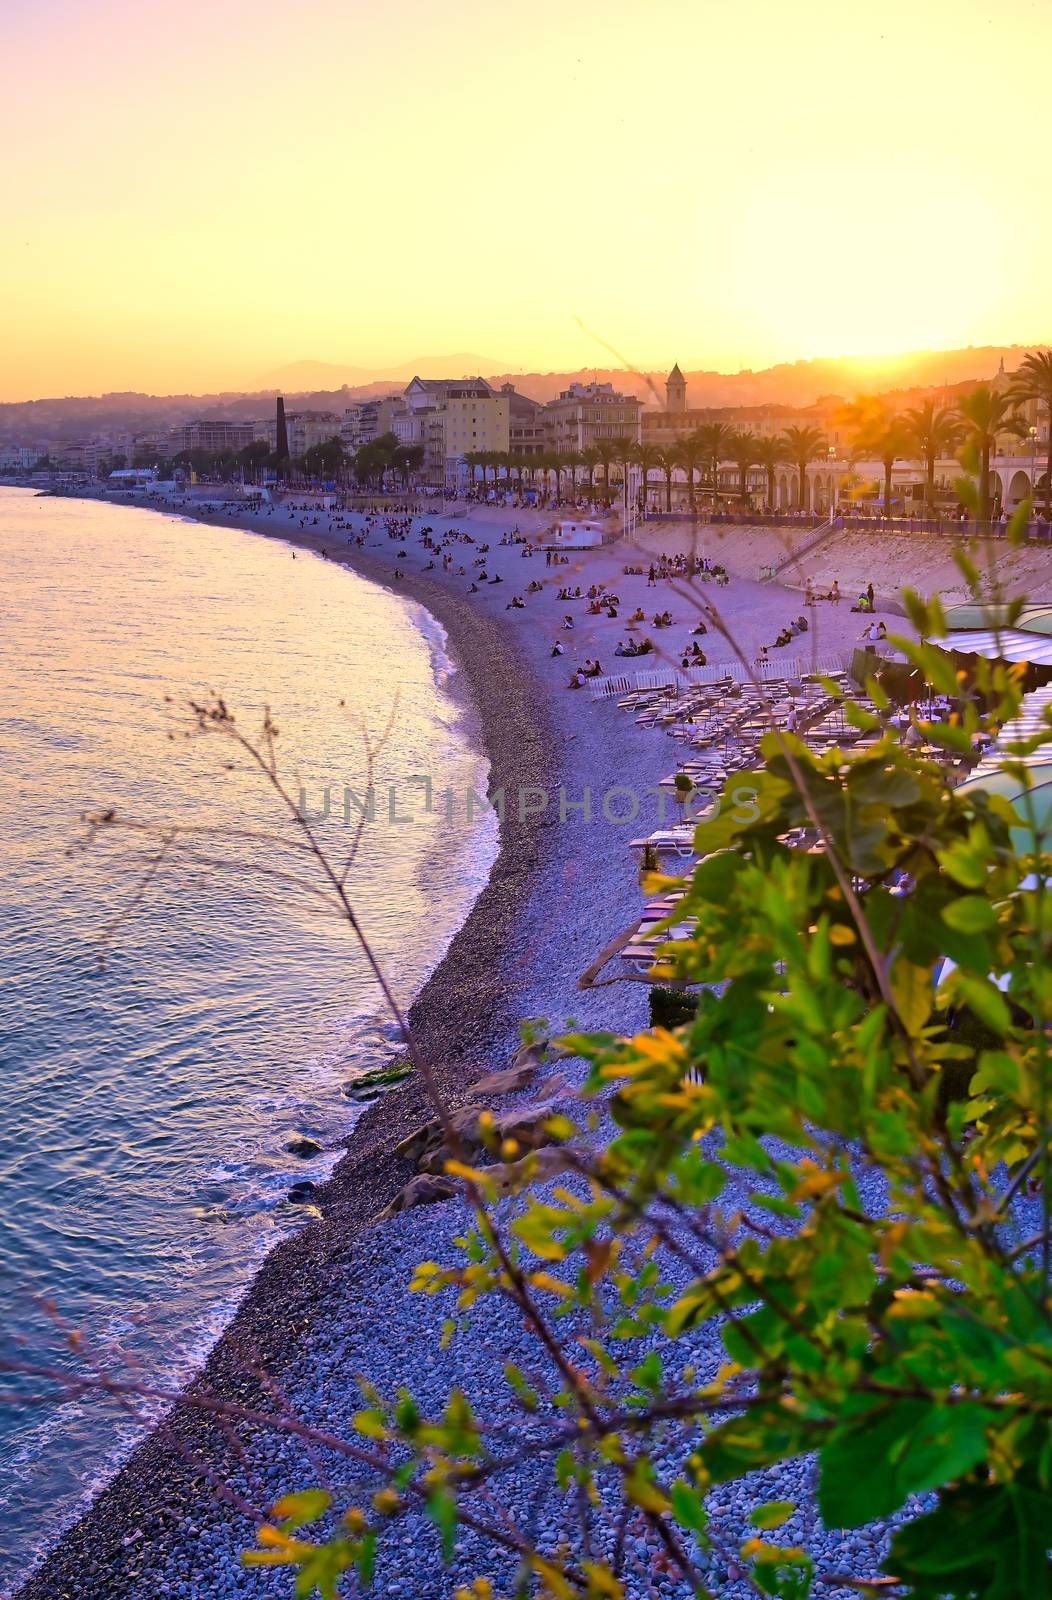 The Promenade des Anglais in Nice, France by jbyard22